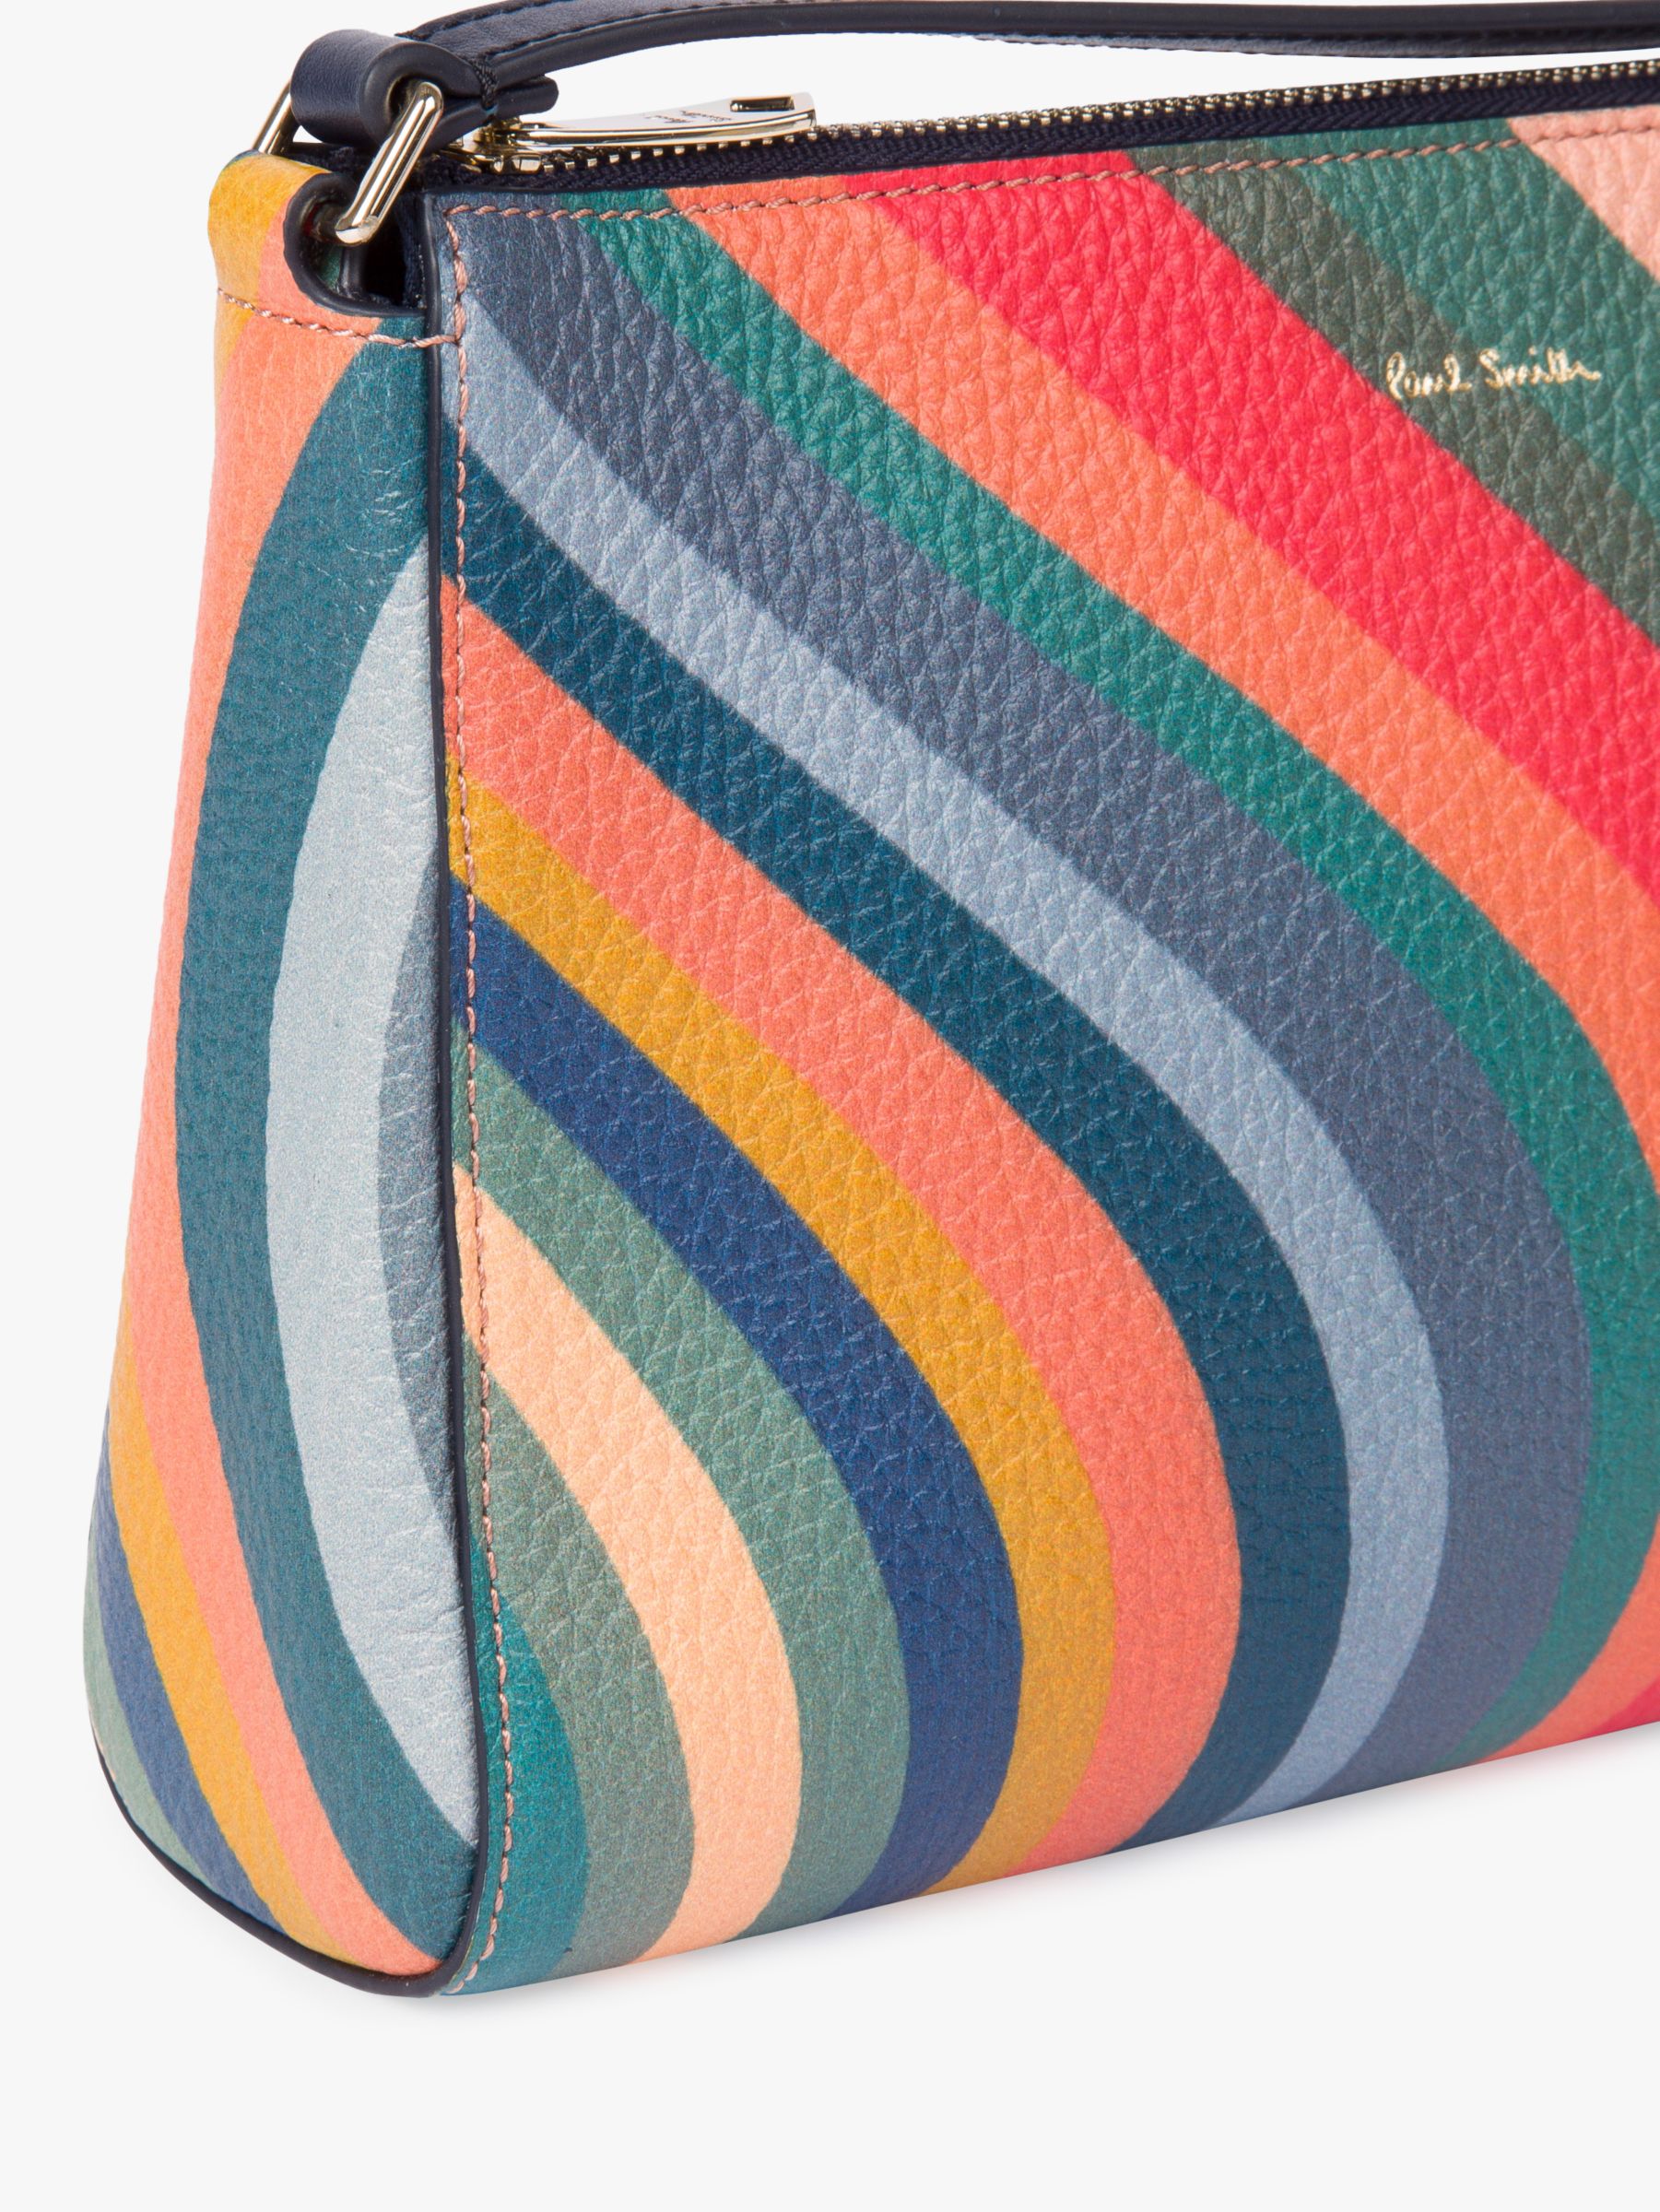 Paul Smith Swirl Westbourne Bag Review 